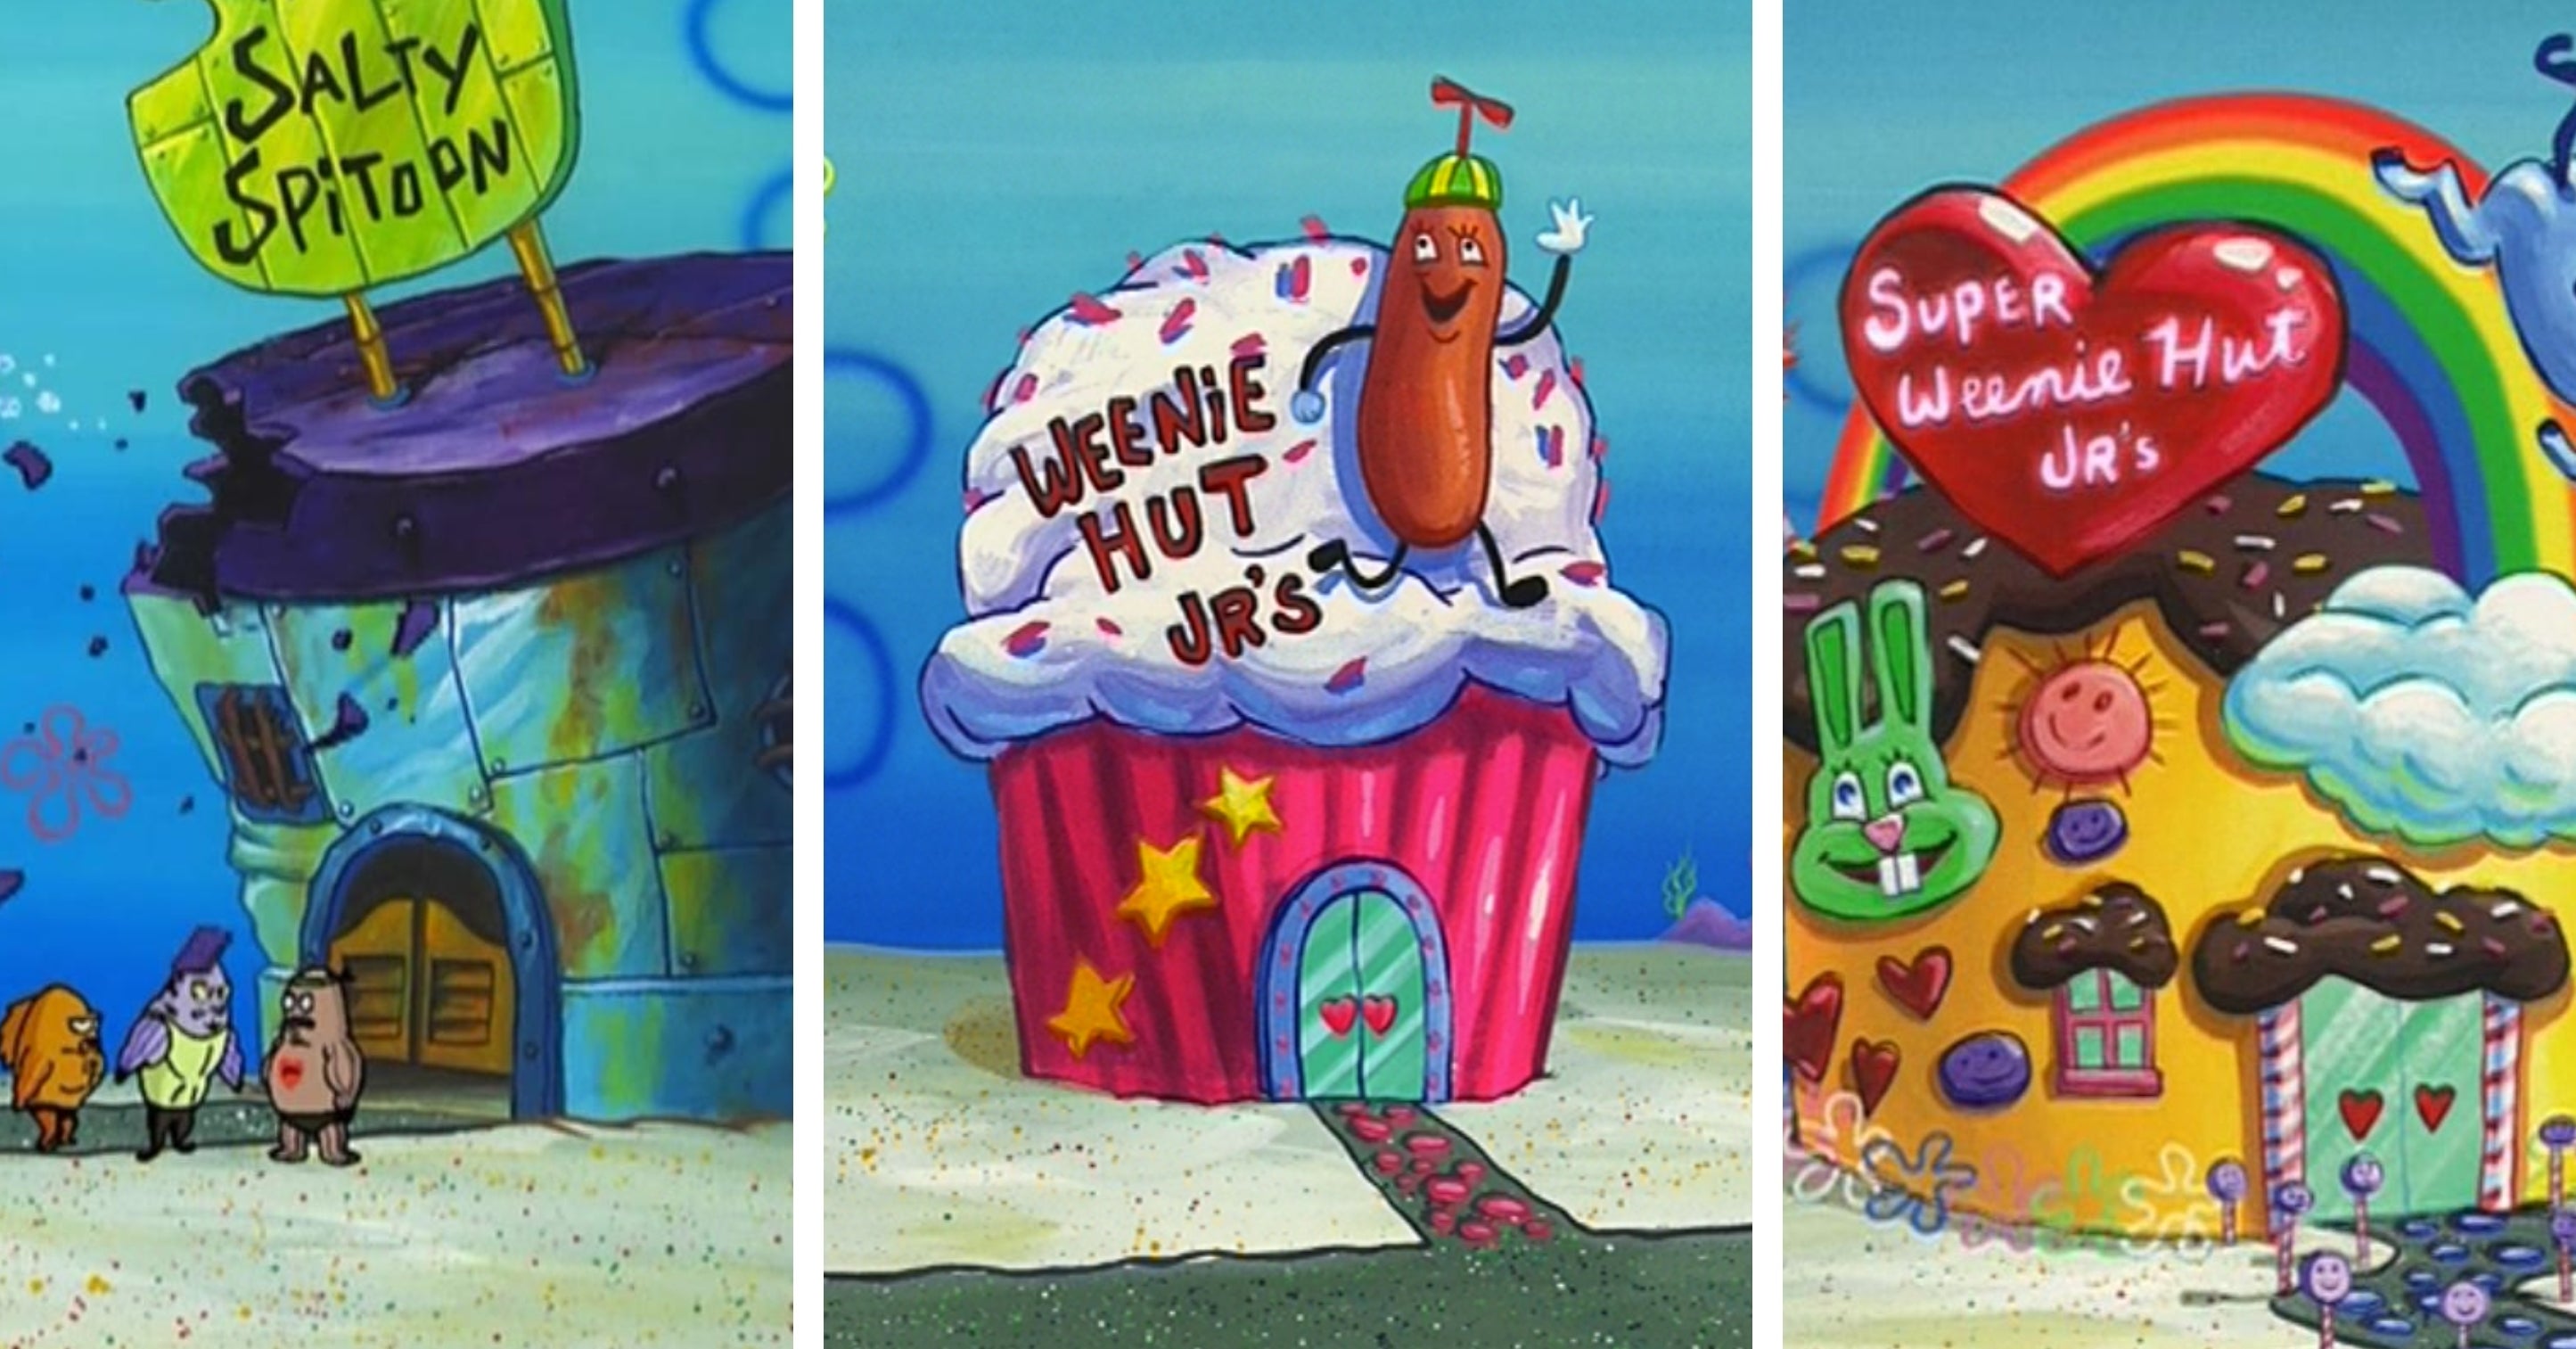 Do You Belong In The Salty Spitoon, Weenie Hut Jr's, Or